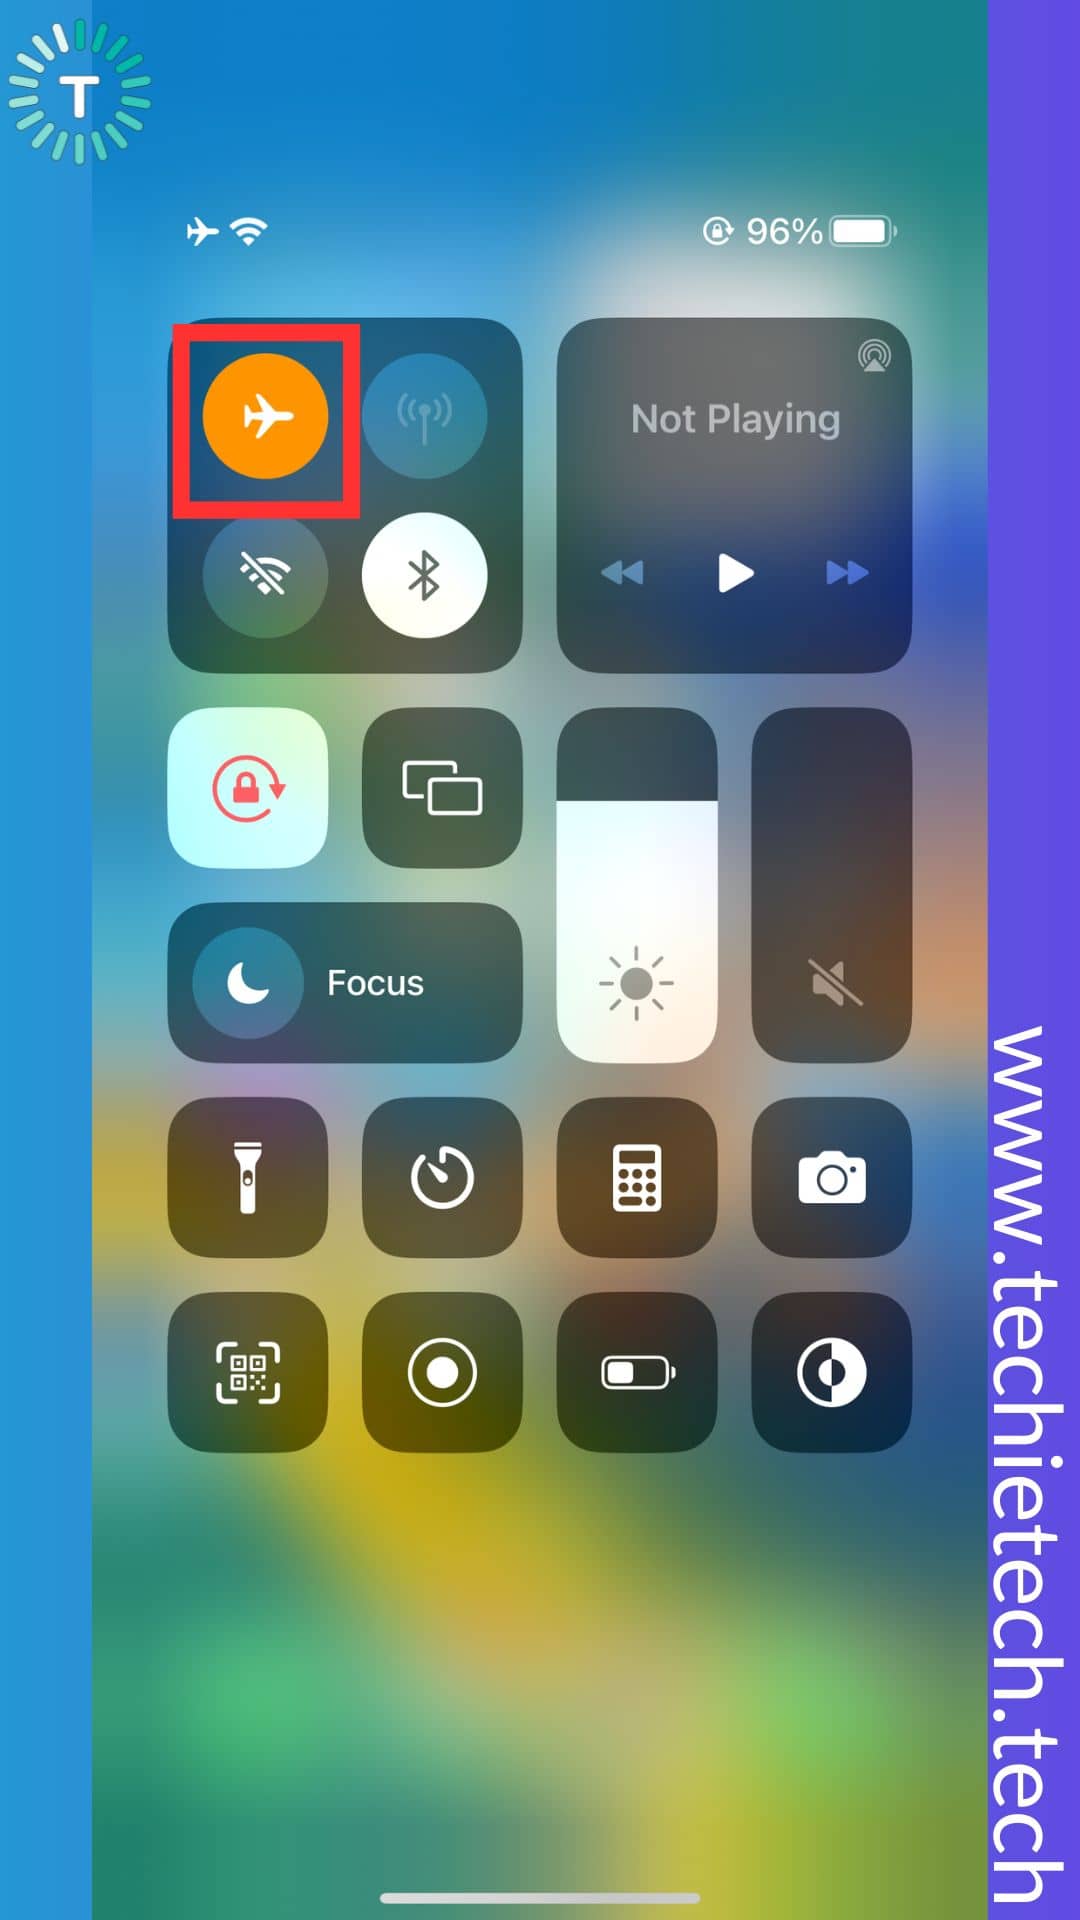 Tap on Airplane mode icon to enable it